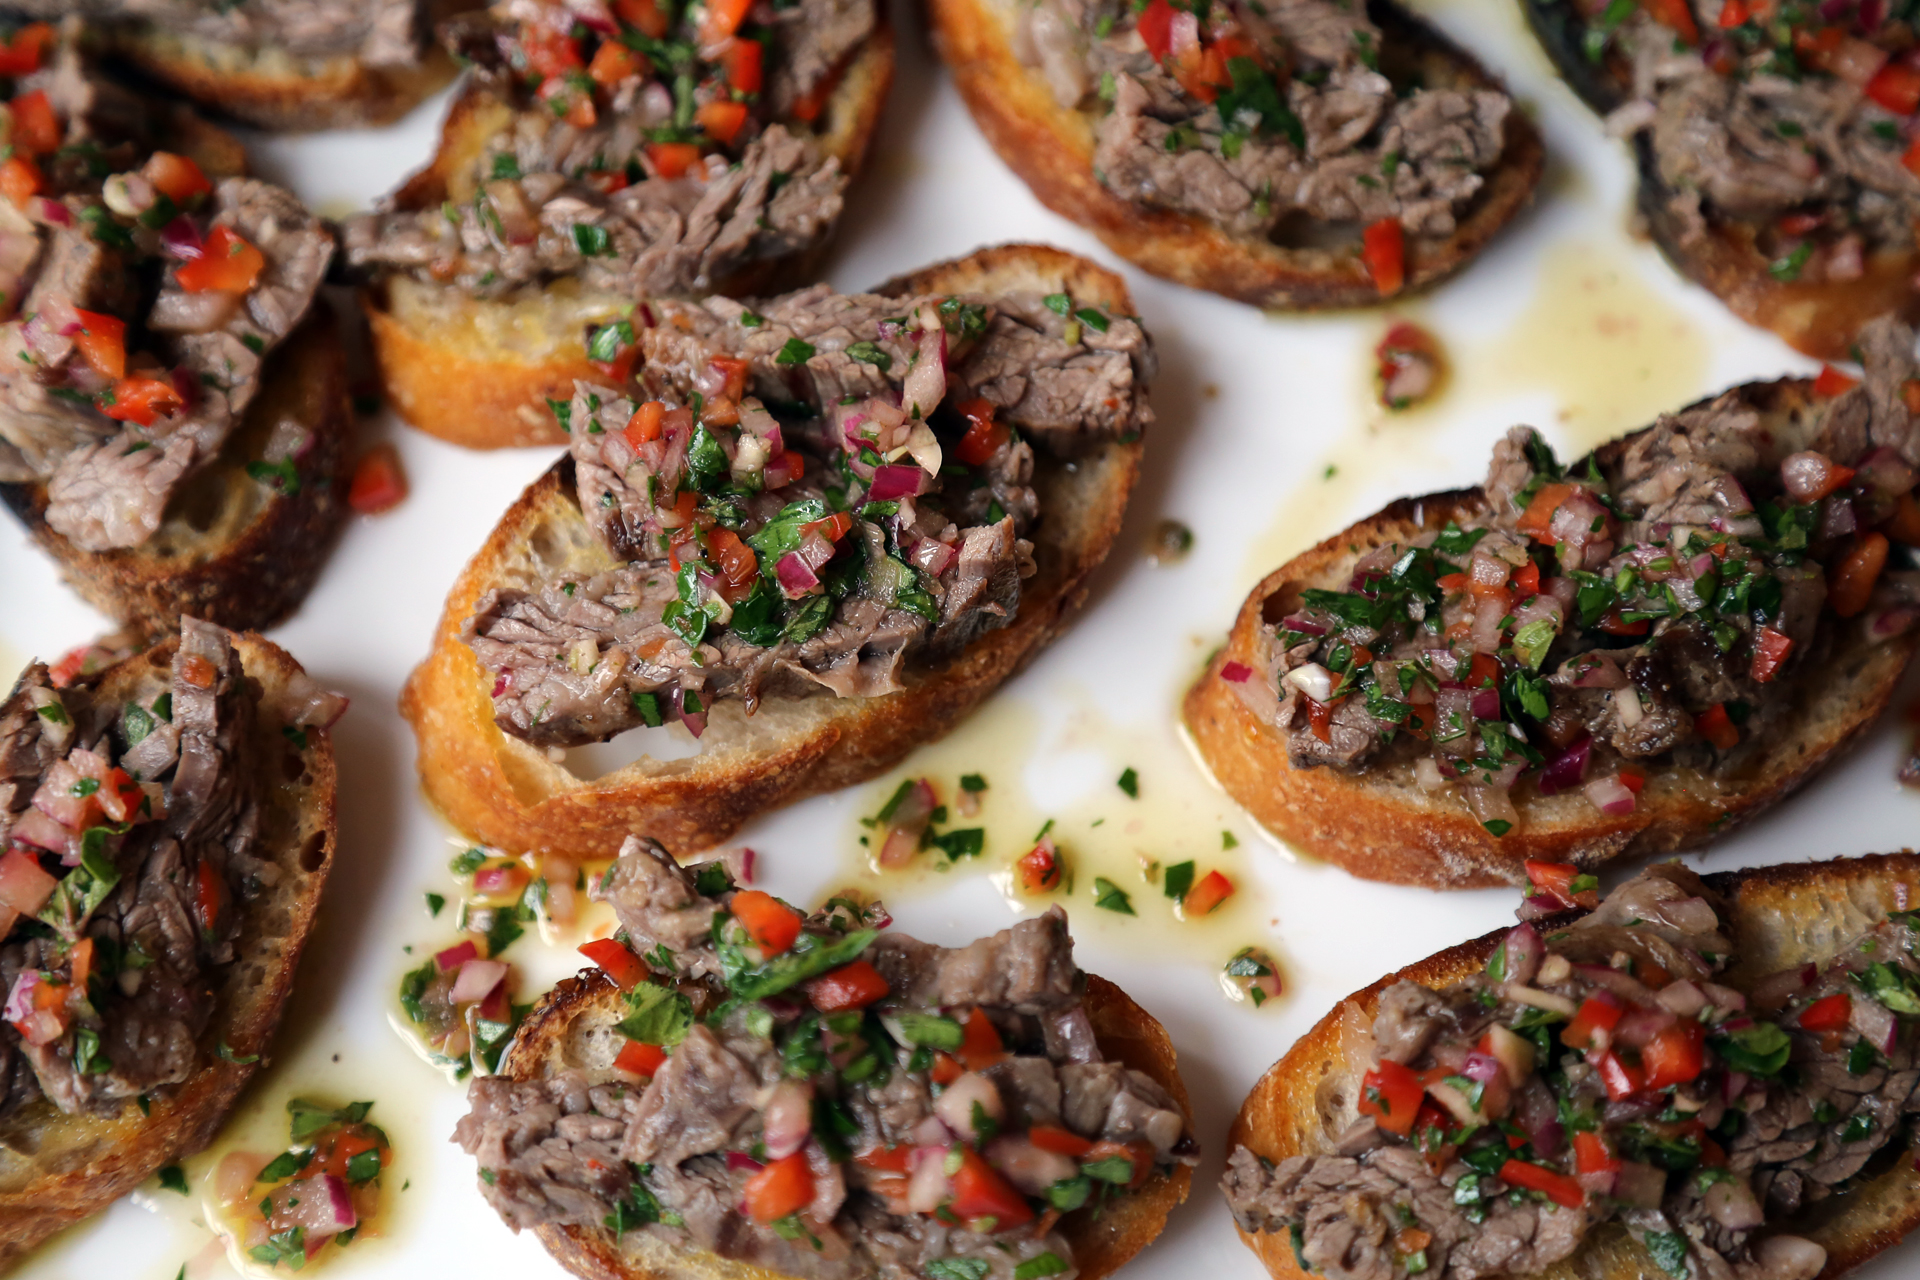  Add a few steak pieces to the top of each crostini and transfer to a serving platter.